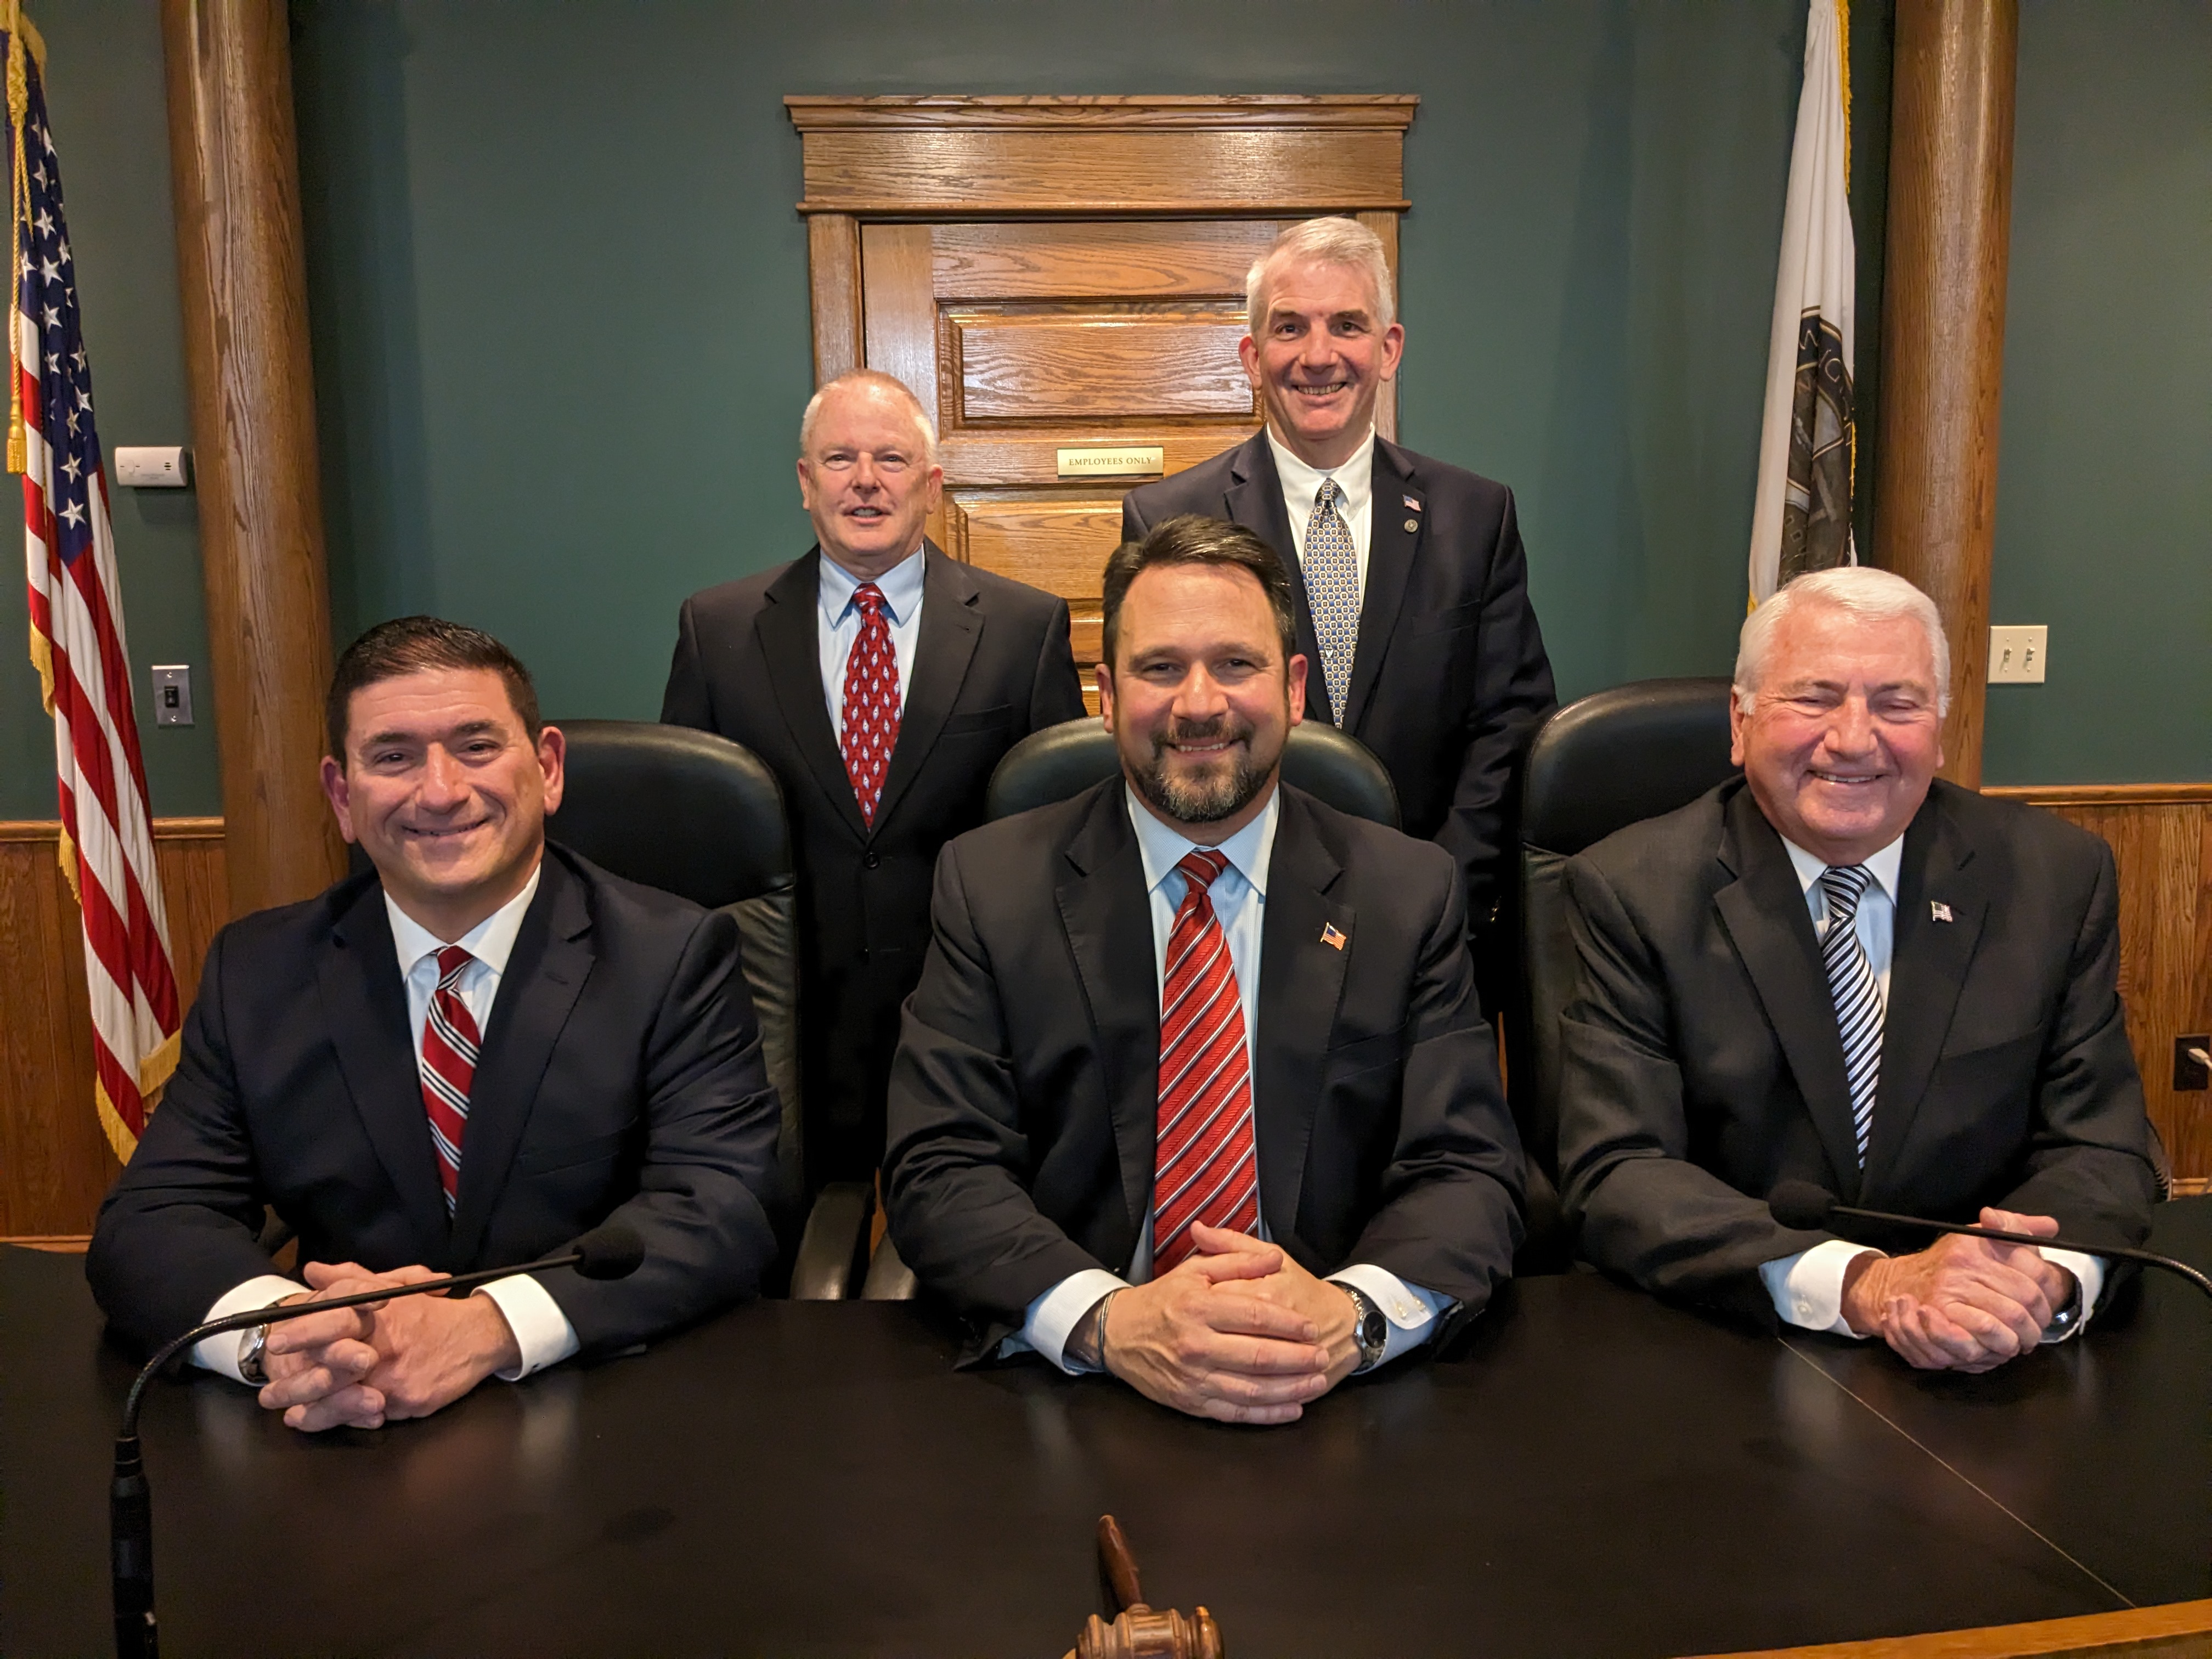 Township Committee Photo 2023